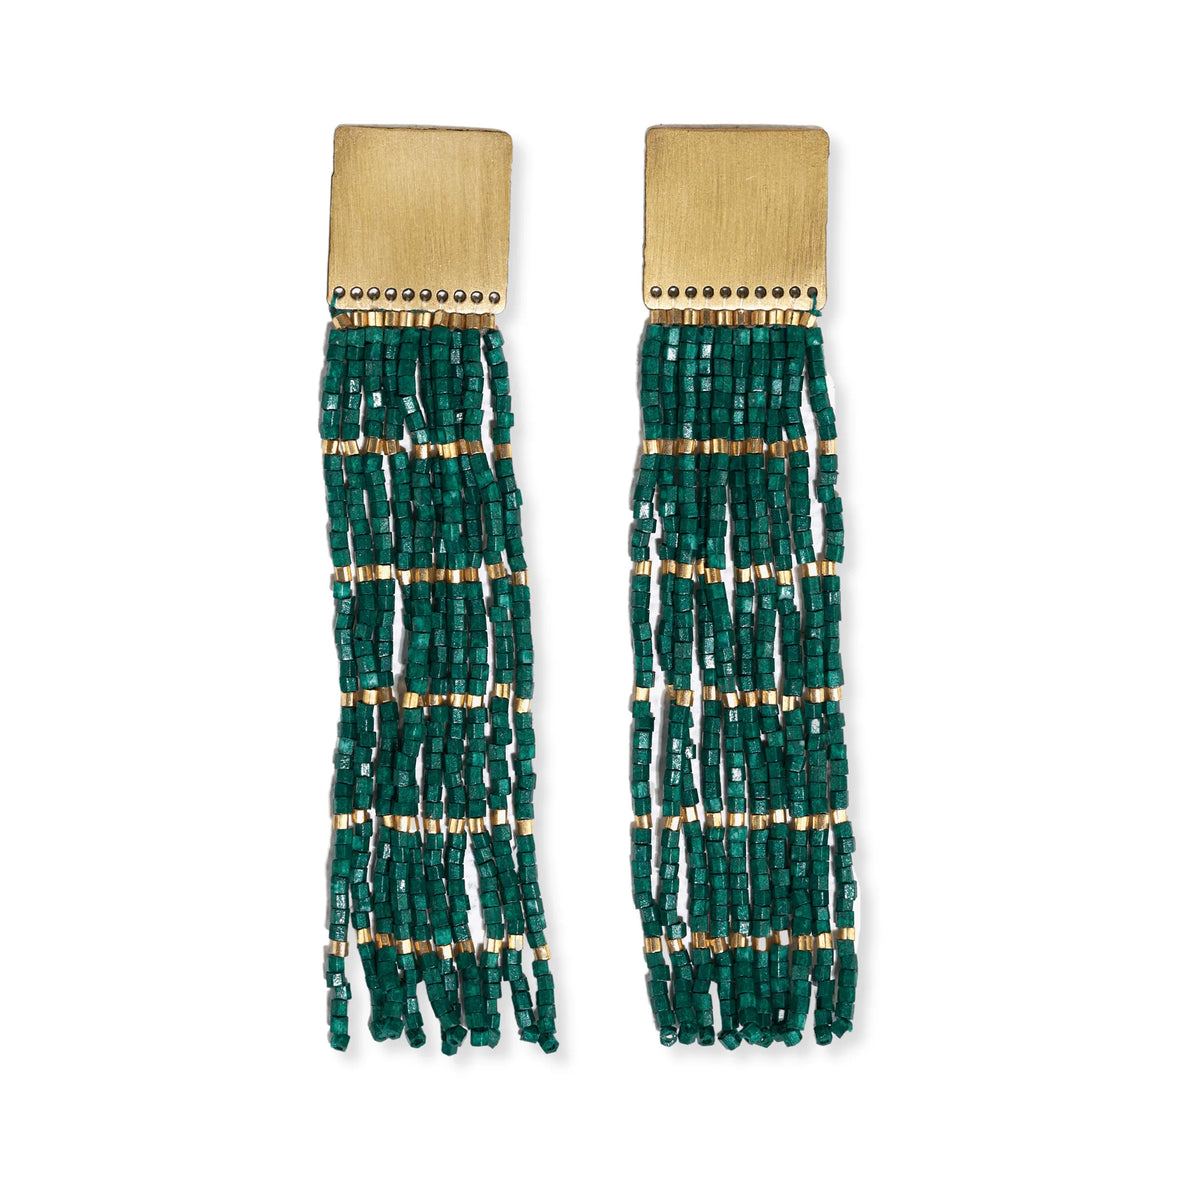 Harlow Brass Top Solid With Gold Stripe Beaded Fringe Earrings Emerald